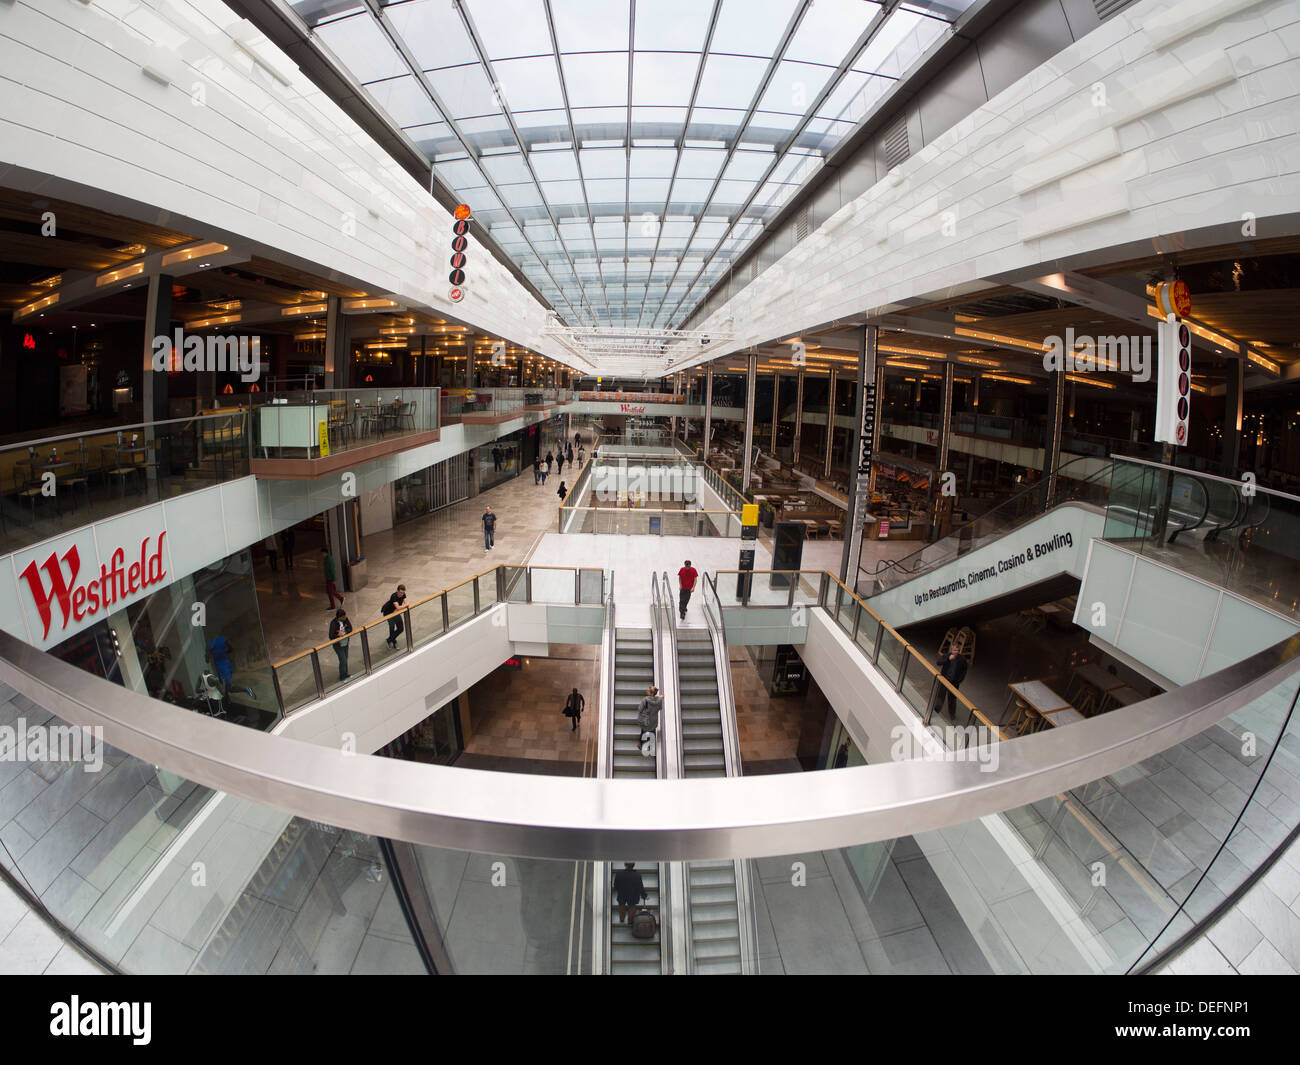 Interior of the Westfield Stratford City Shopping Centre, London 1 Stock Photo